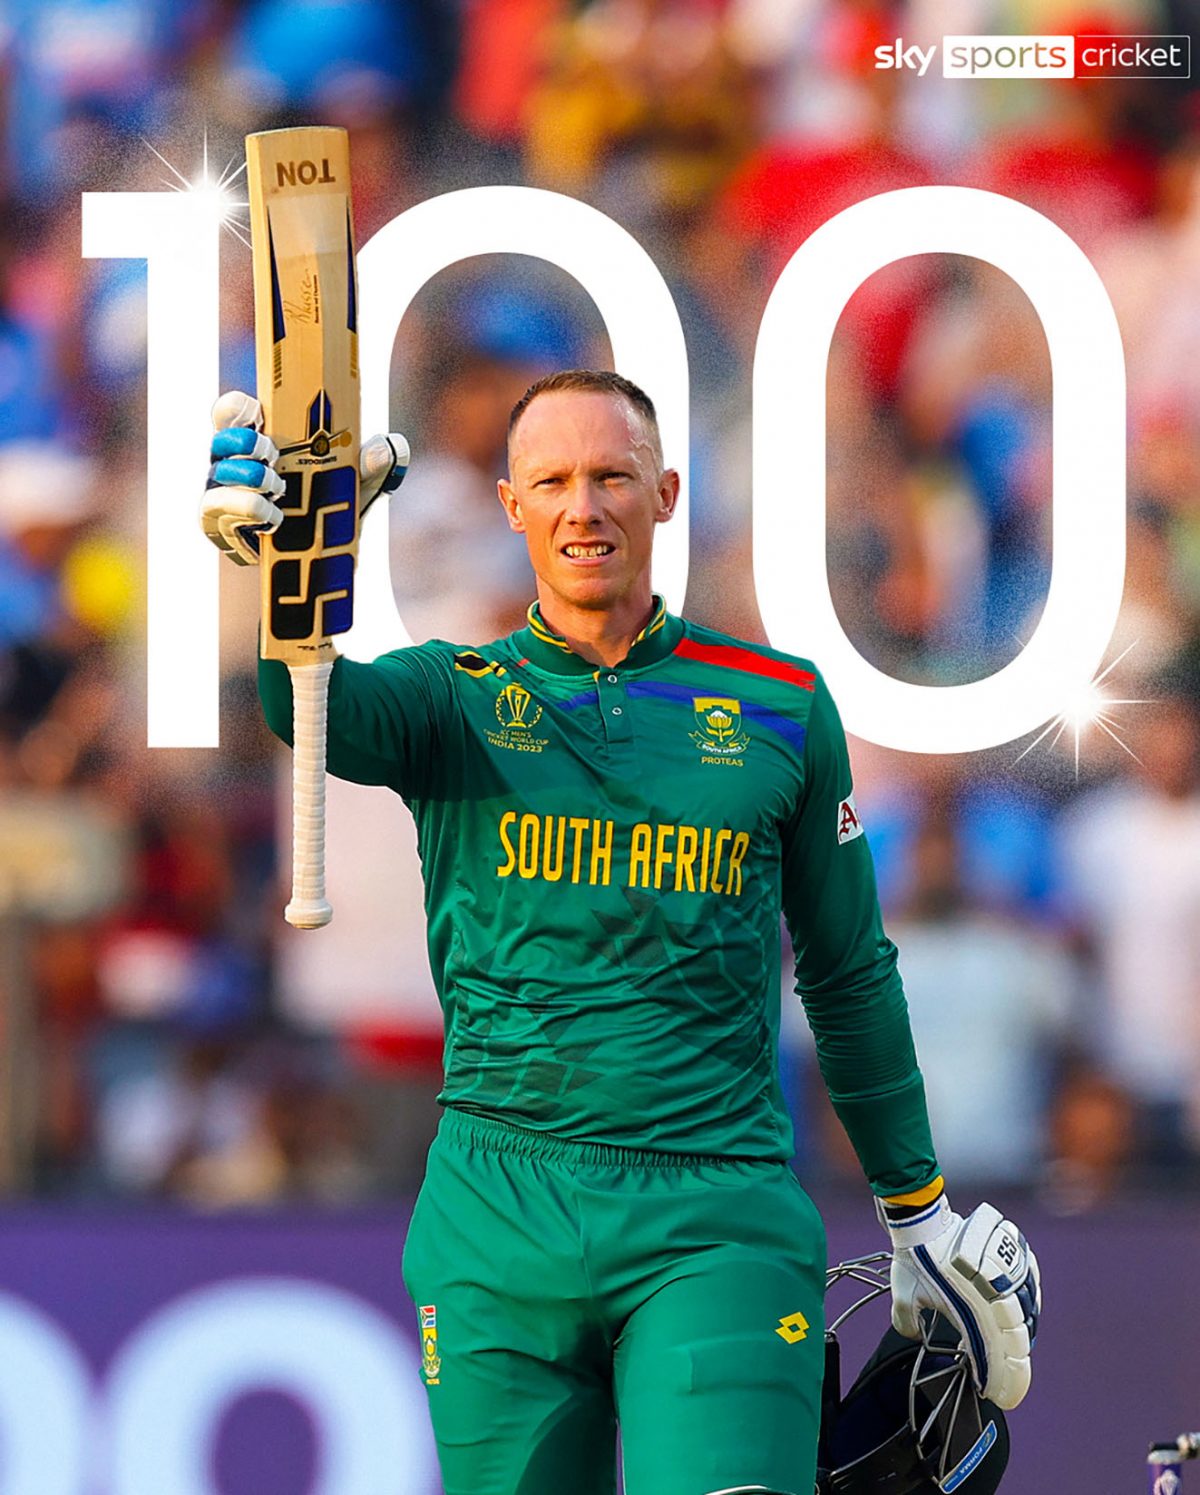 Rassie van der Dussen hit a century to help South Africa defeat New Zealand in a World Cup match for the first time since 1999